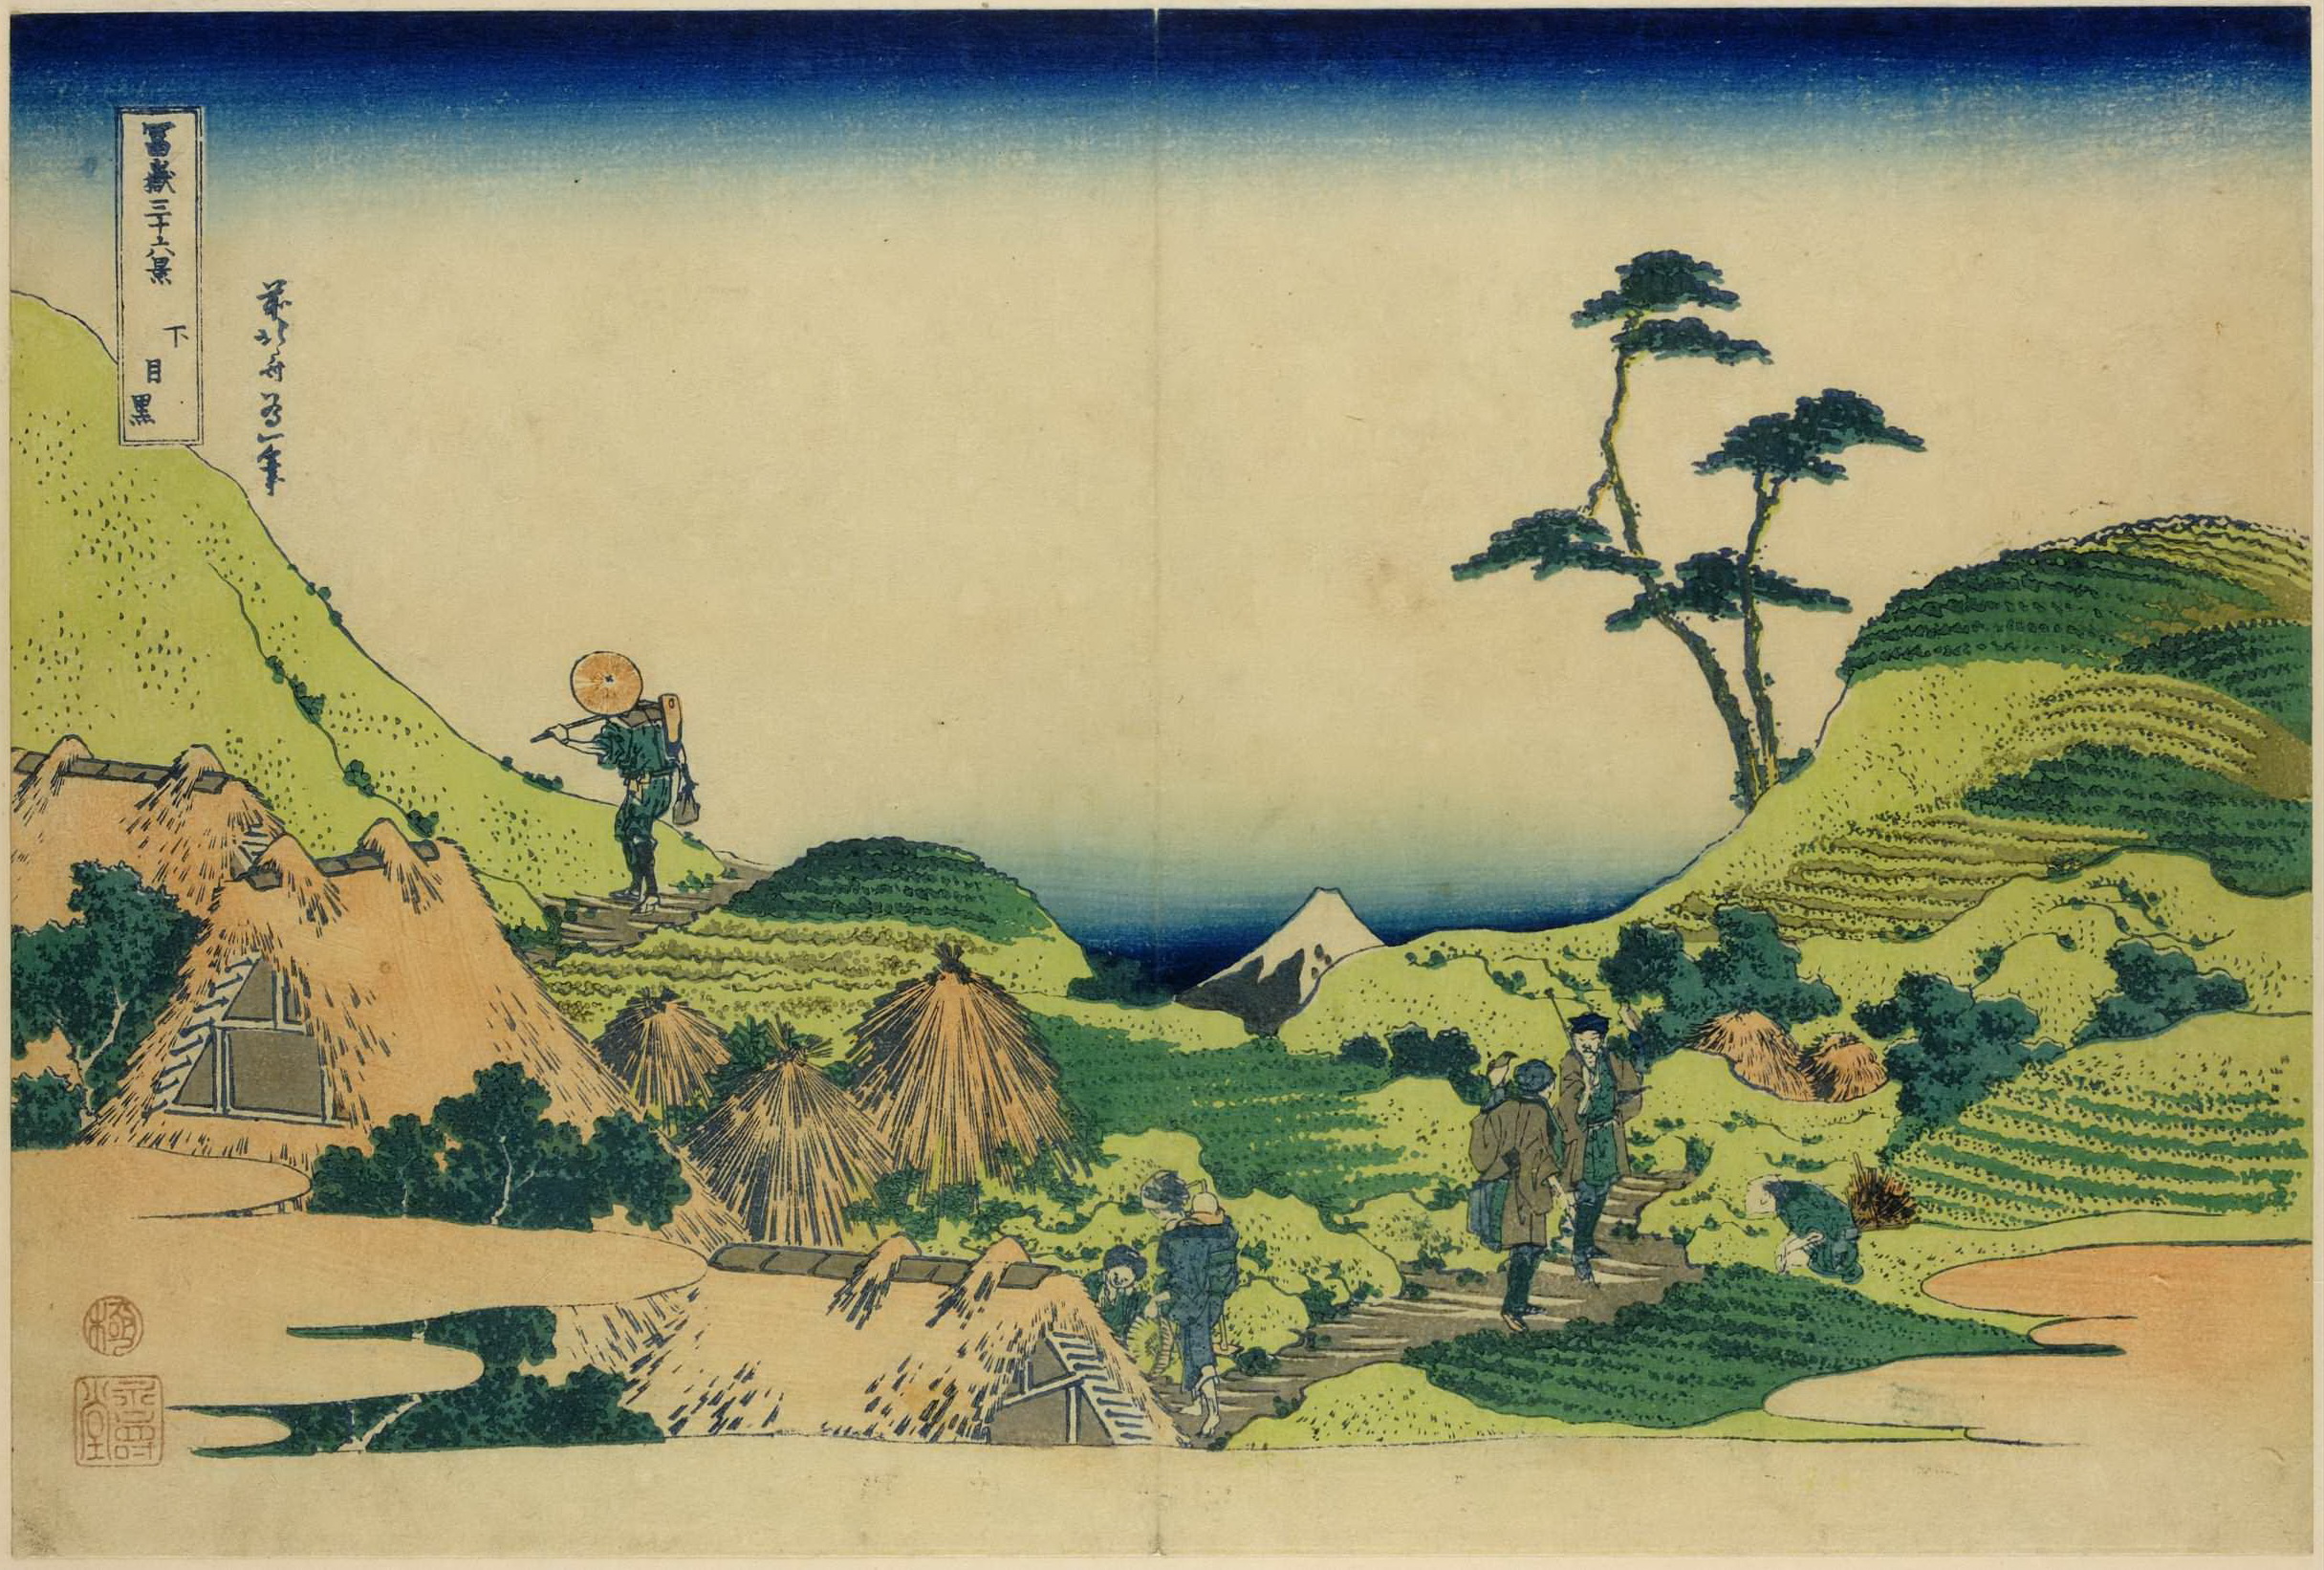 Lower Meguro (Shimo Meguro), from the series Thirty-six Views of Mount Fuji